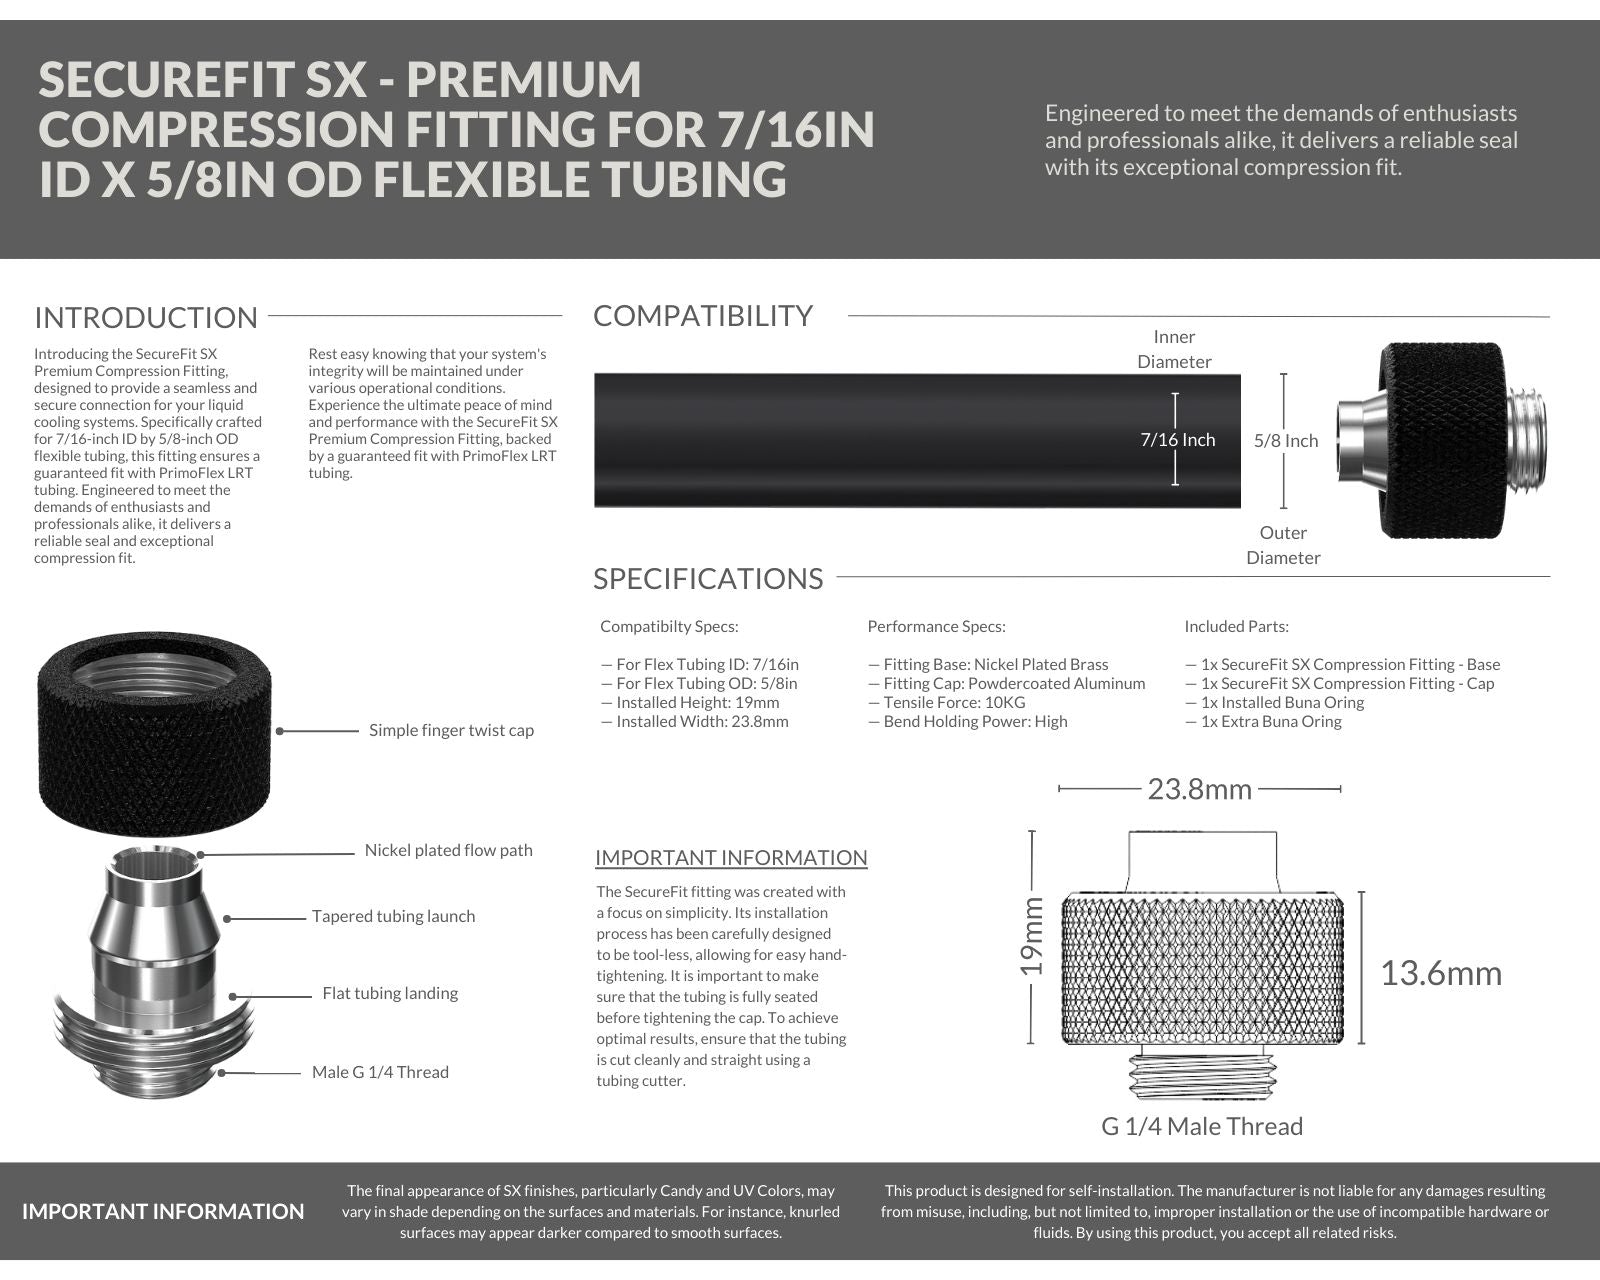 PrimoChill SecureFit SX - Premium Compression Fitting For 7/16in ID x 5/8in OD Flexible Tubing (F-SFSX758) - Available in 20+ Colors, Custom Watercooling Loop Ready - TX Matte Black